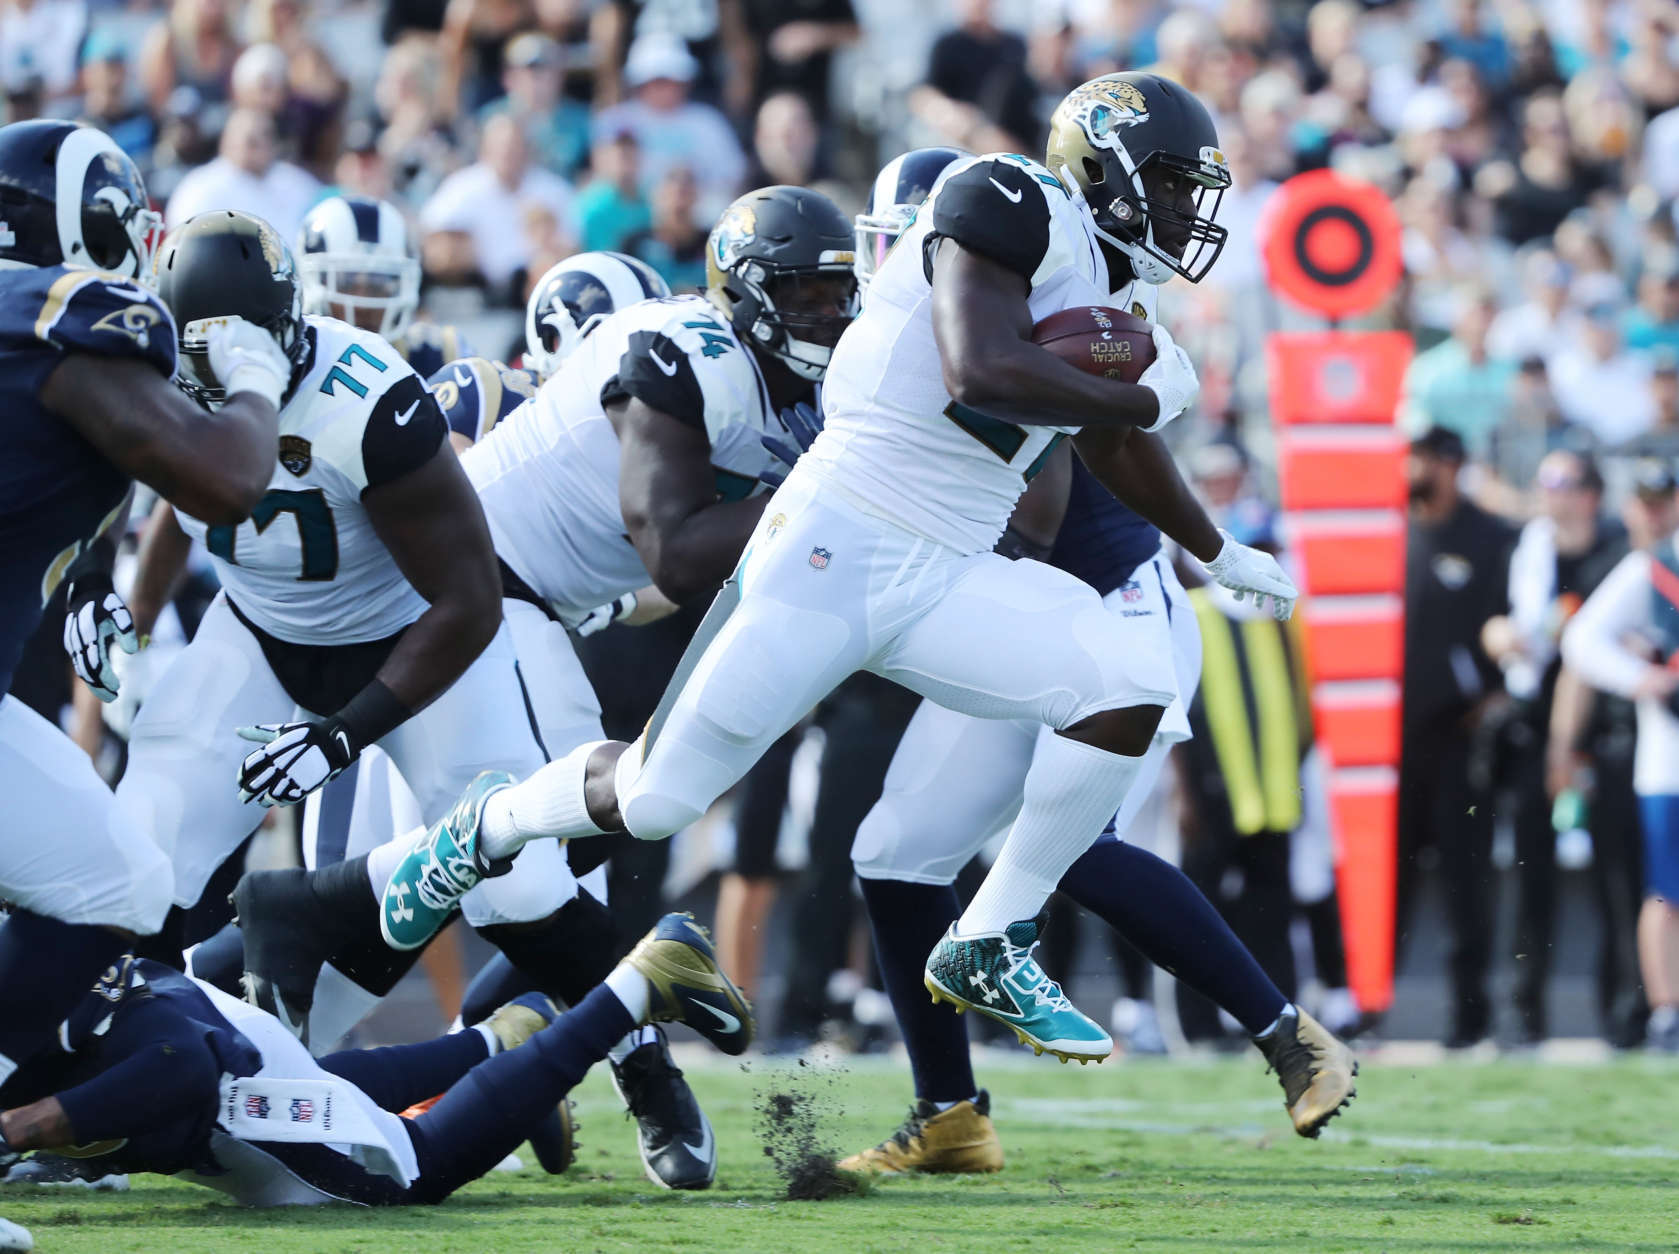 JACKSONVILLE, FL - OCTOBER 15:  Leonard Fournette #27 of the Jacksonville Jaguars runs with the football for a 75-yard touchdown in the first half of their game against the Los Angeles Rams at EverBank Field on October 15, 2017 in Jacksonville, Florida.  (Photo by Sam Greenwood/Getty Images)